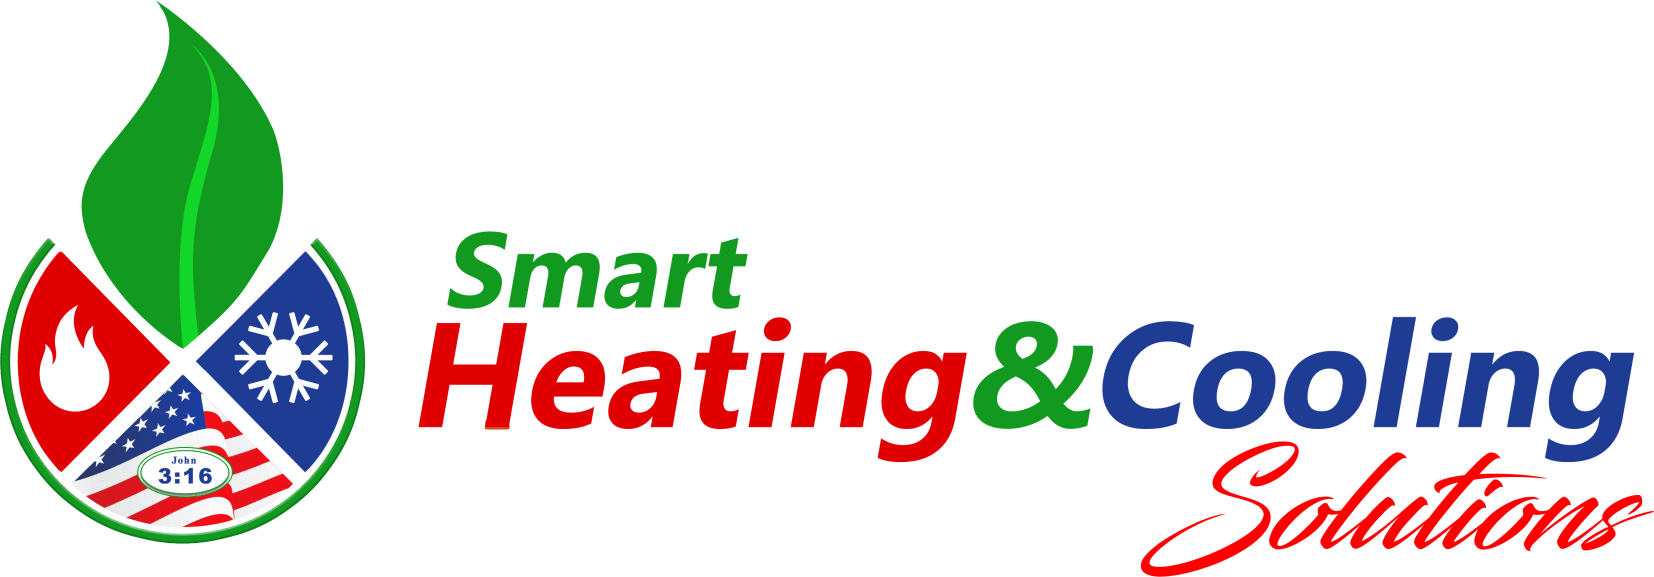 Smart Heating & Cooling Solutions